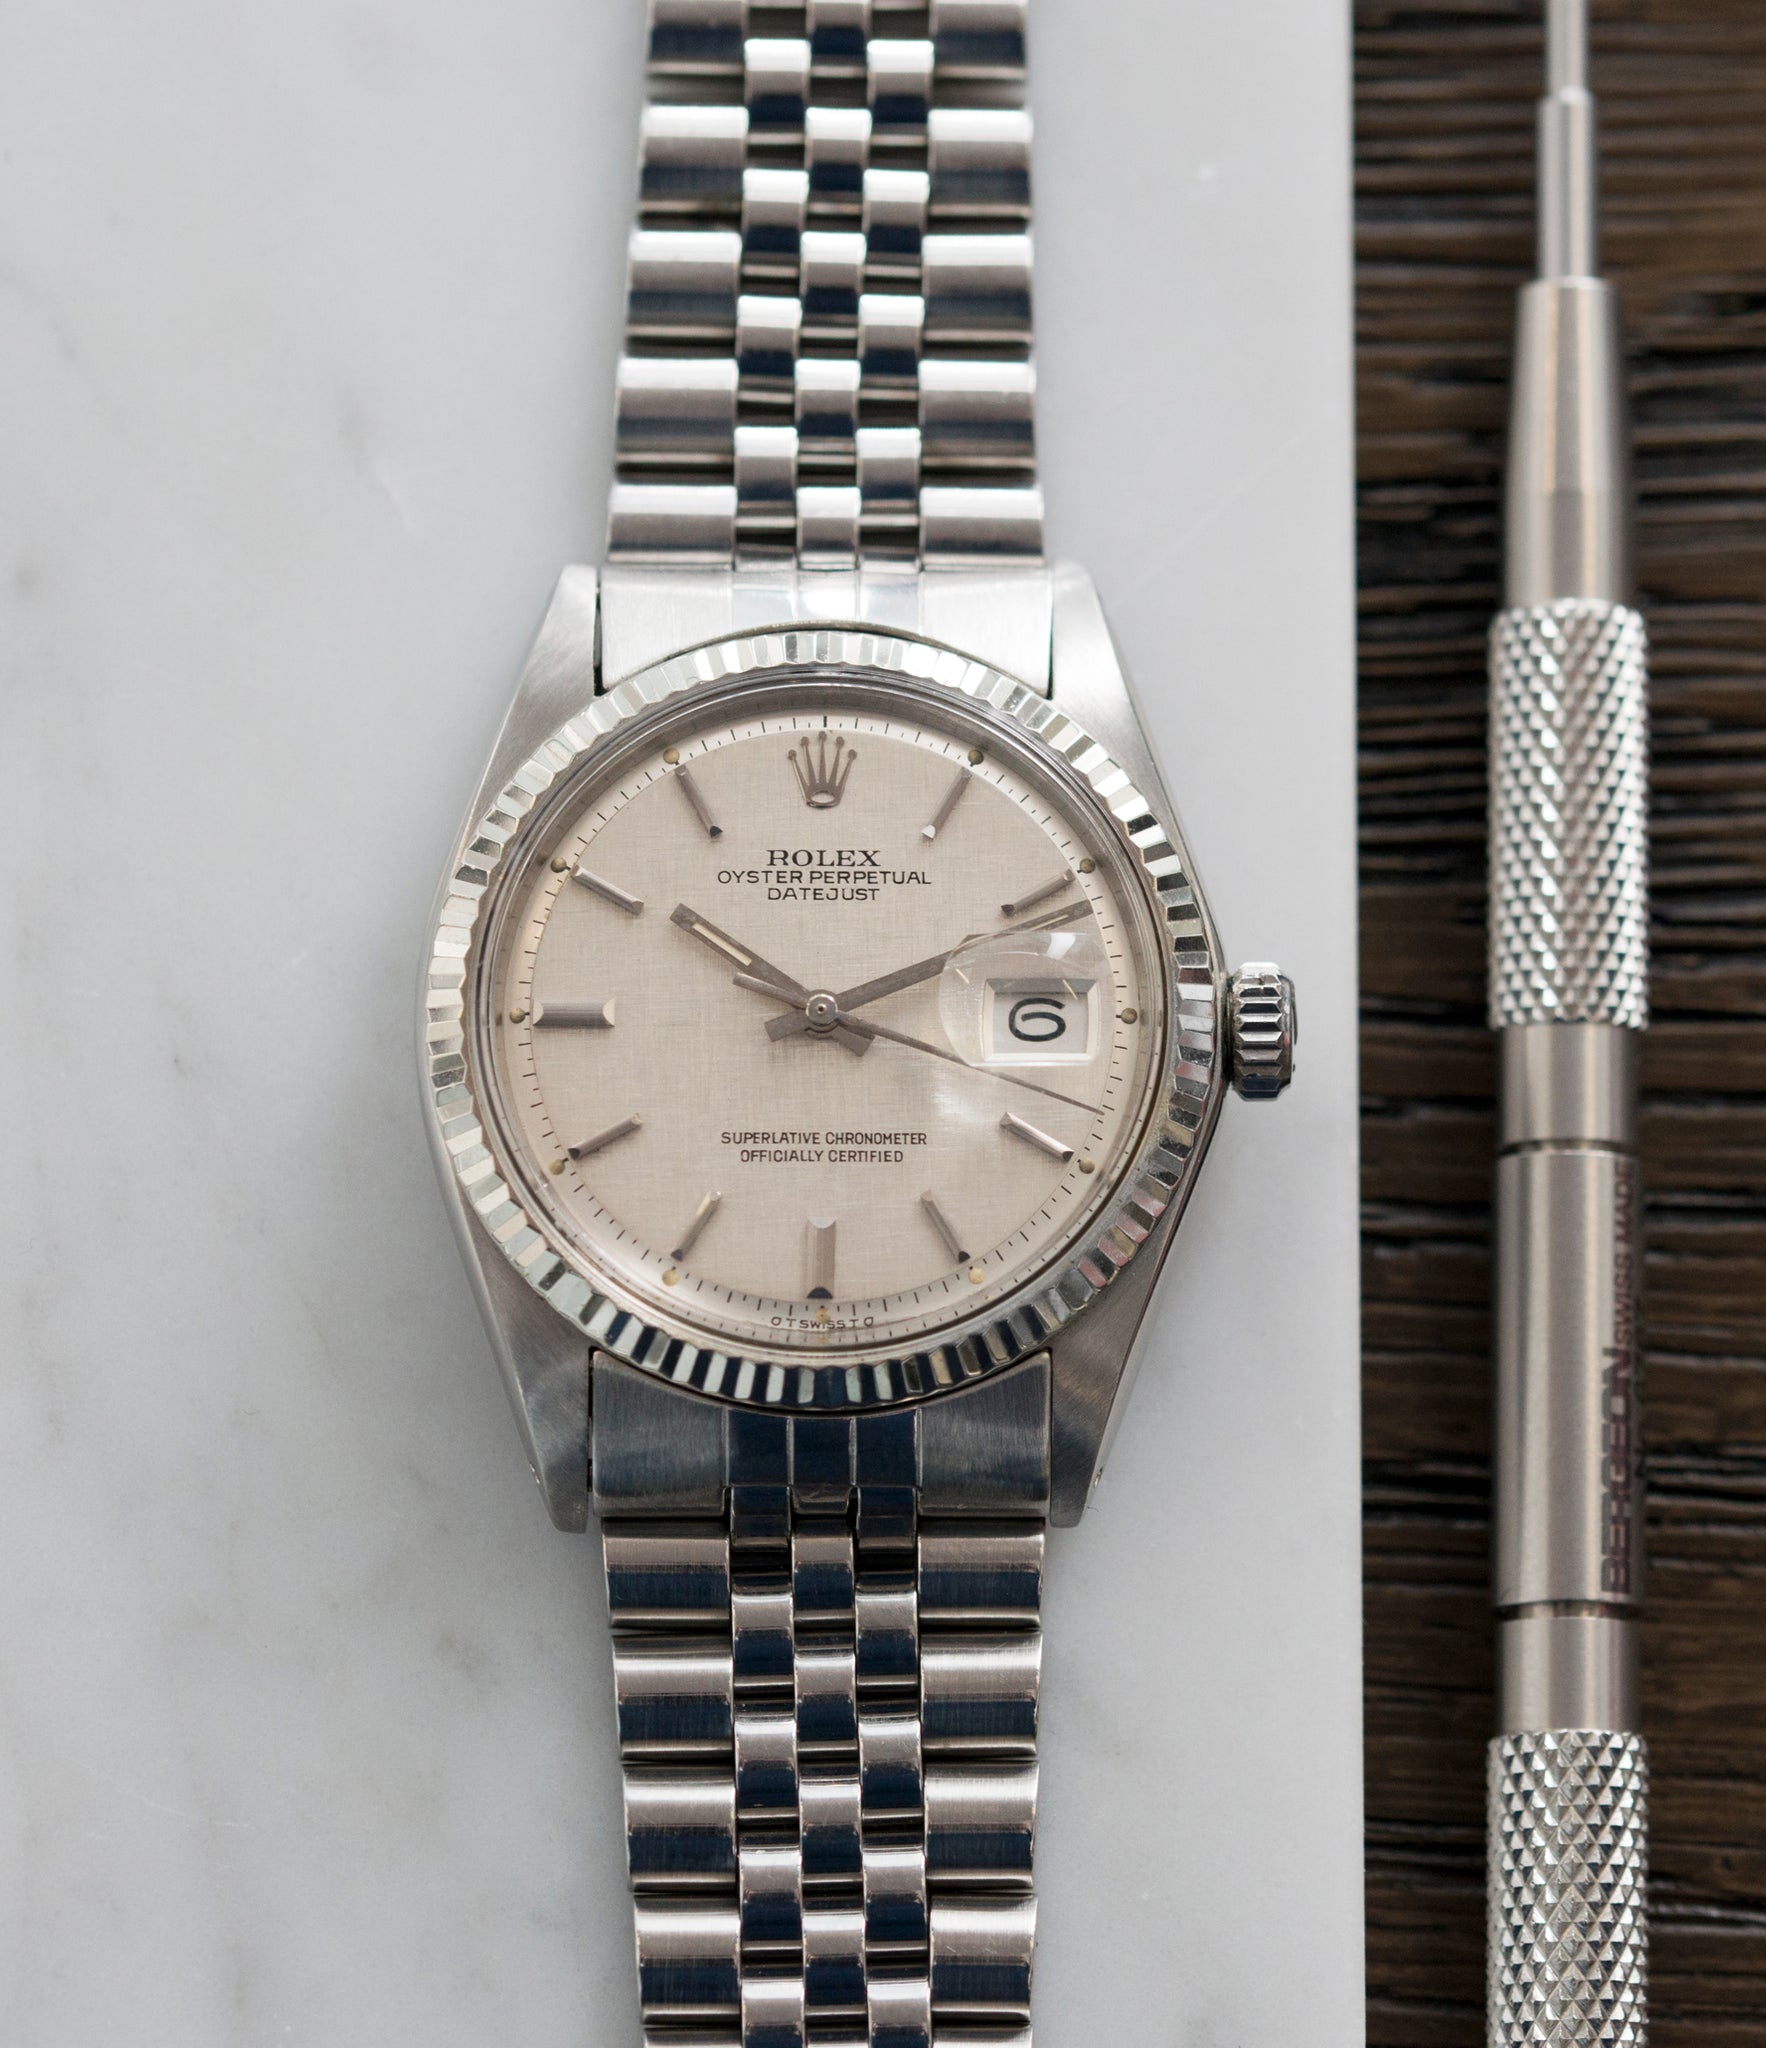 buying Rolex Datejust 1601 linen dial Oyster Perpetual vintage automatic steel sport dress watch for sale online at A Collected Man London UK specialist rare vintage watches